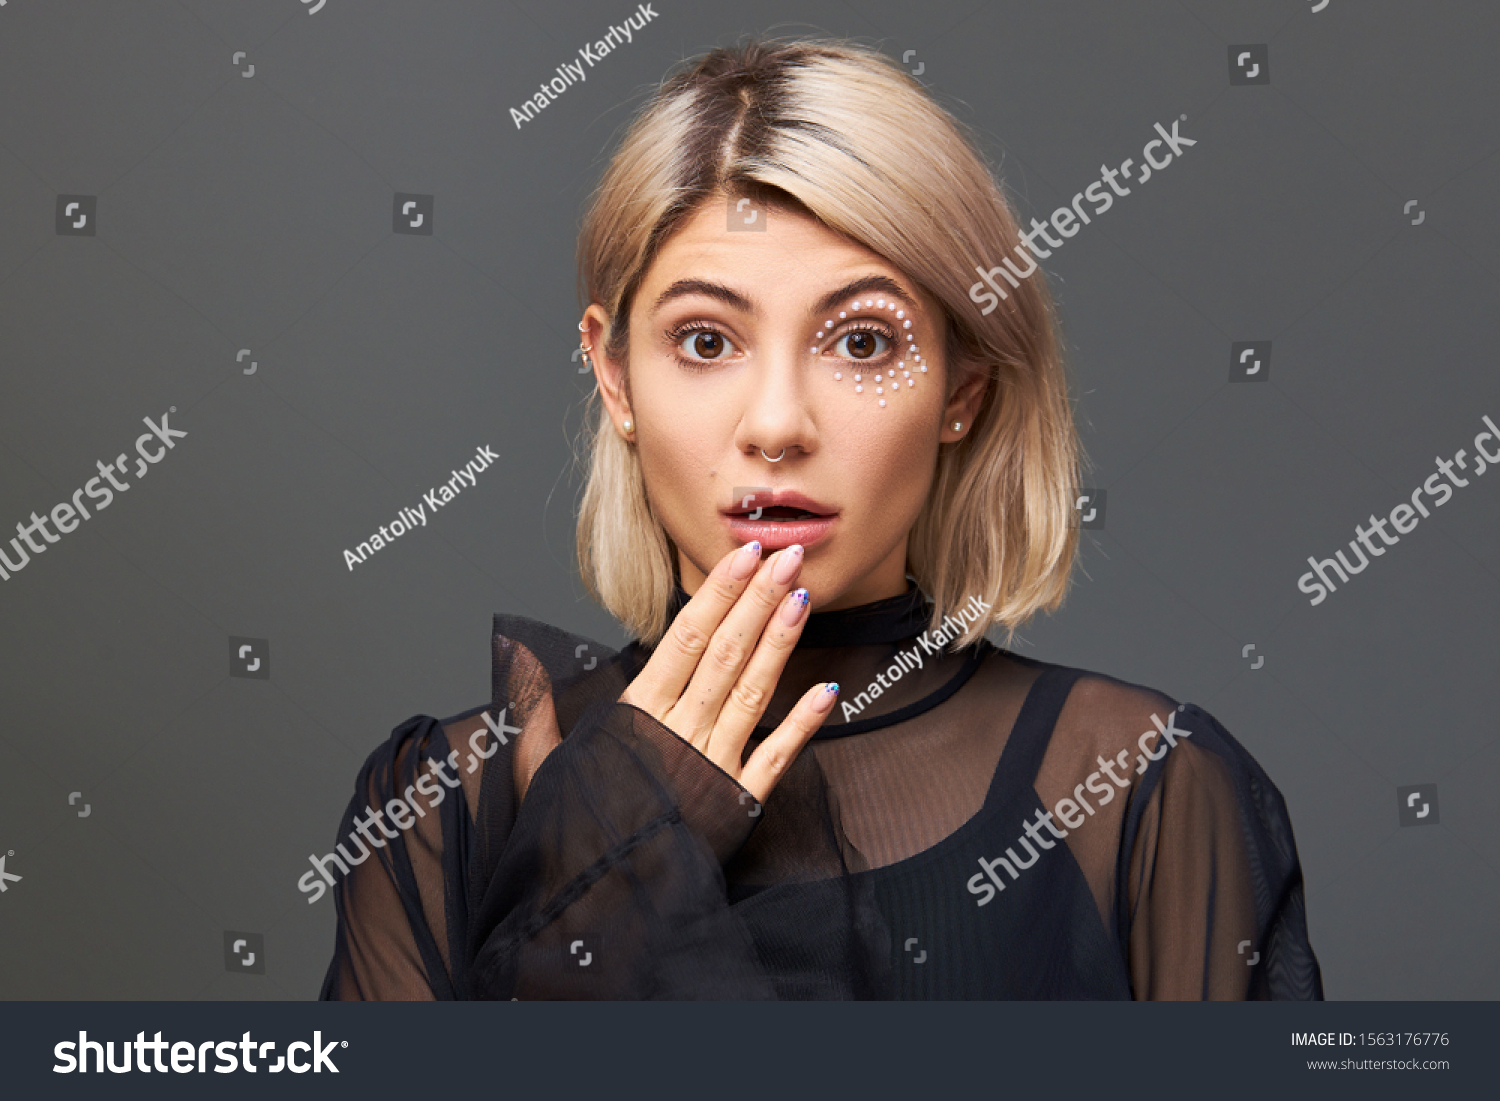 Human facial expressions, emotions and feelings. Gorgeous cute European female with blonde hair expressing genuine surprise and shock, opening mouth and popping eyes out, being in full disbelief #1563176776